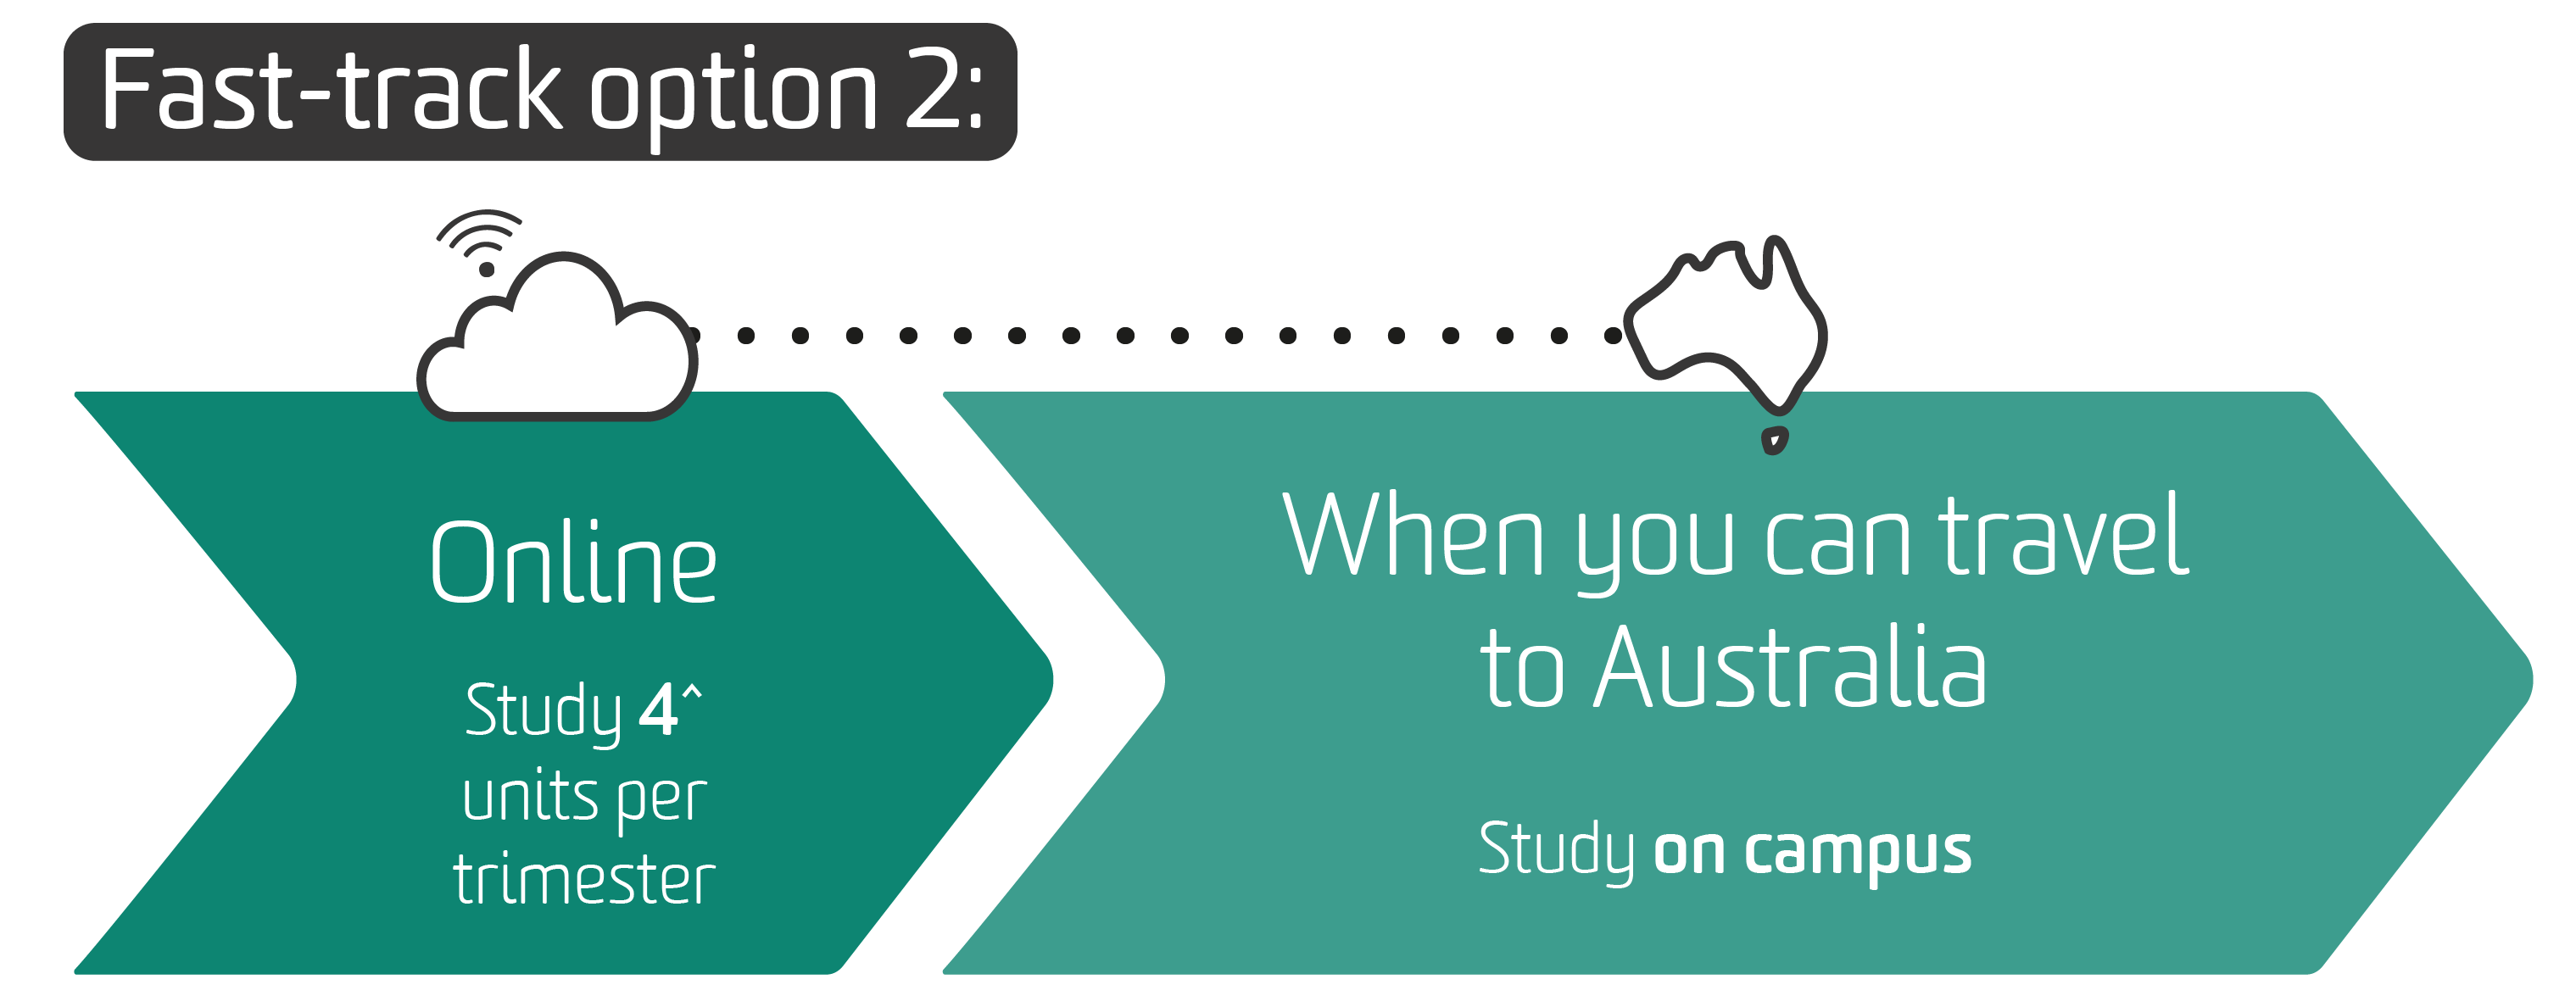 The diagram shows the Fast-track option 2: study 4 units online (which is a full-time study load). When you can travel to Australia, study on campus.